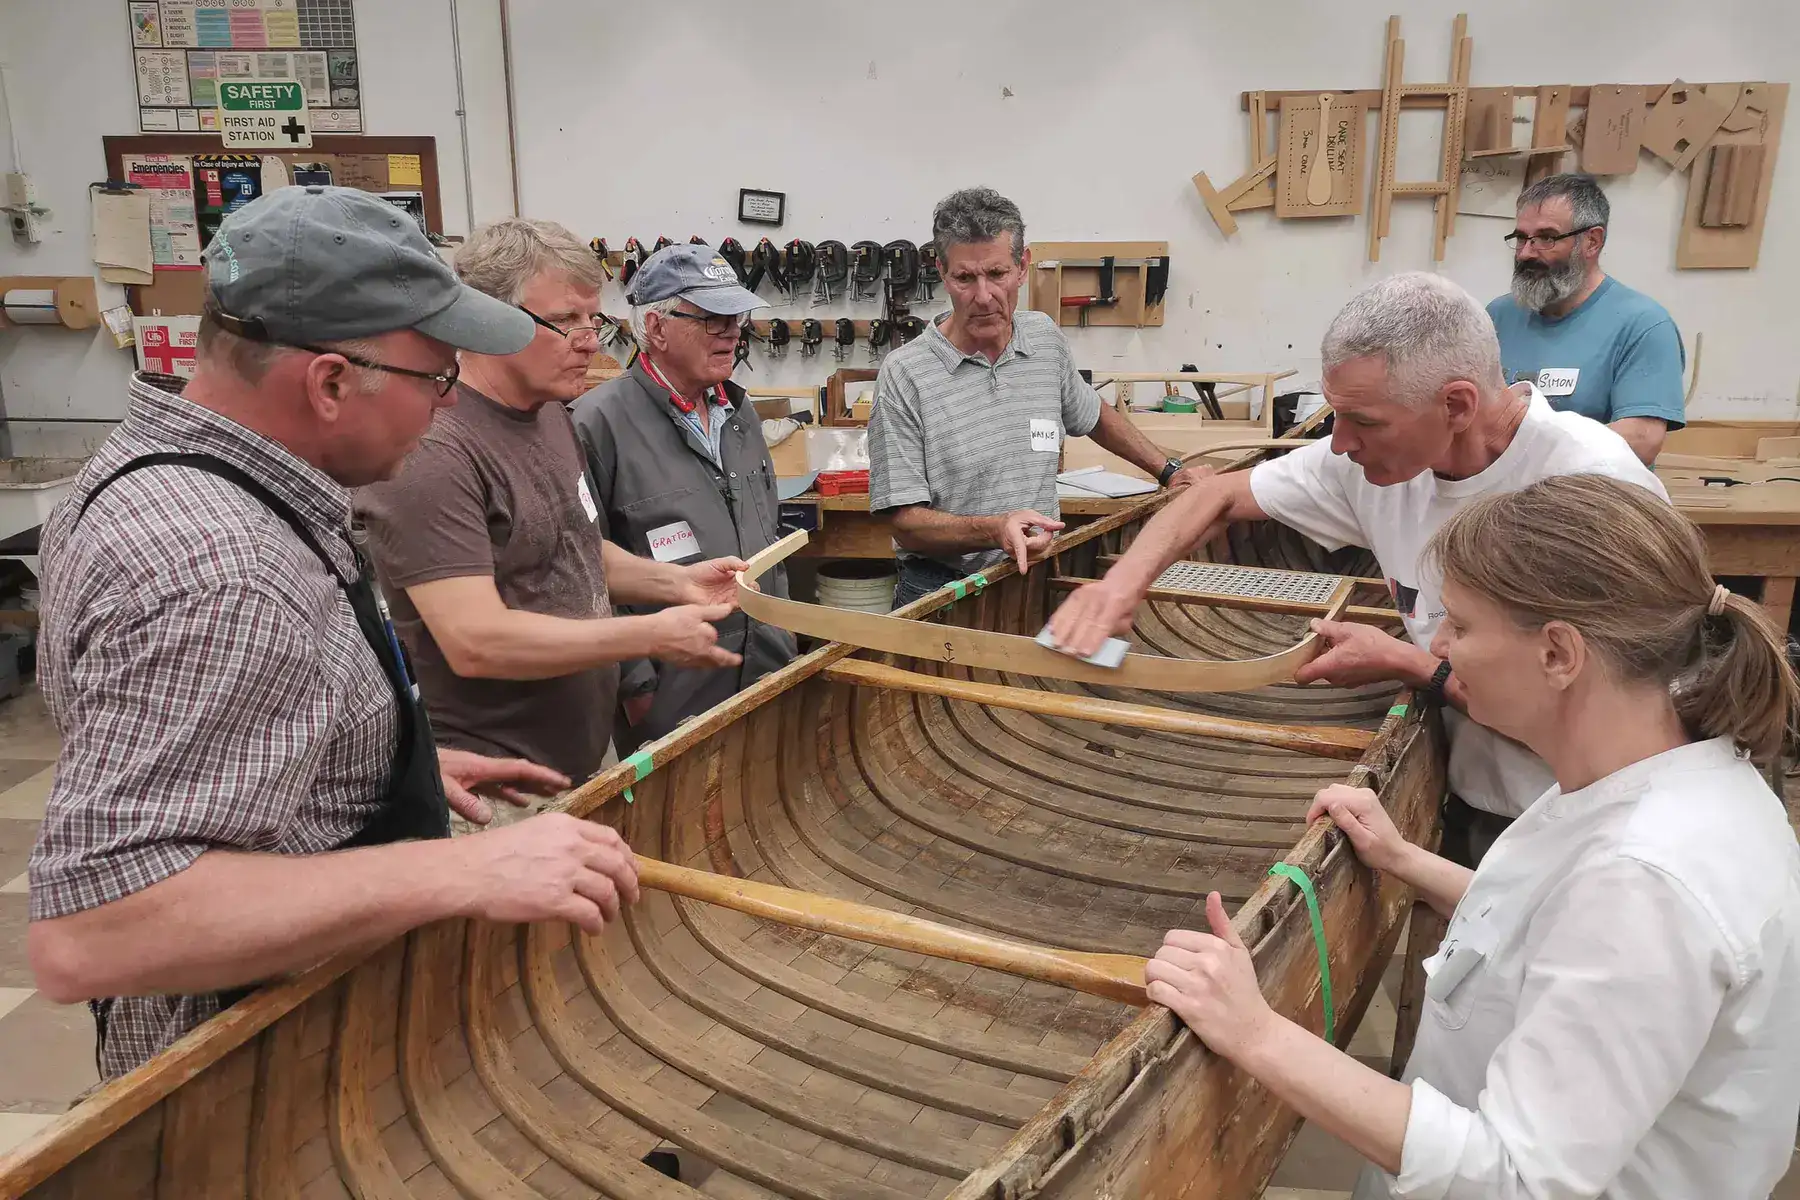 Group of course attendees and instructor surrounding a canoe restoration project.